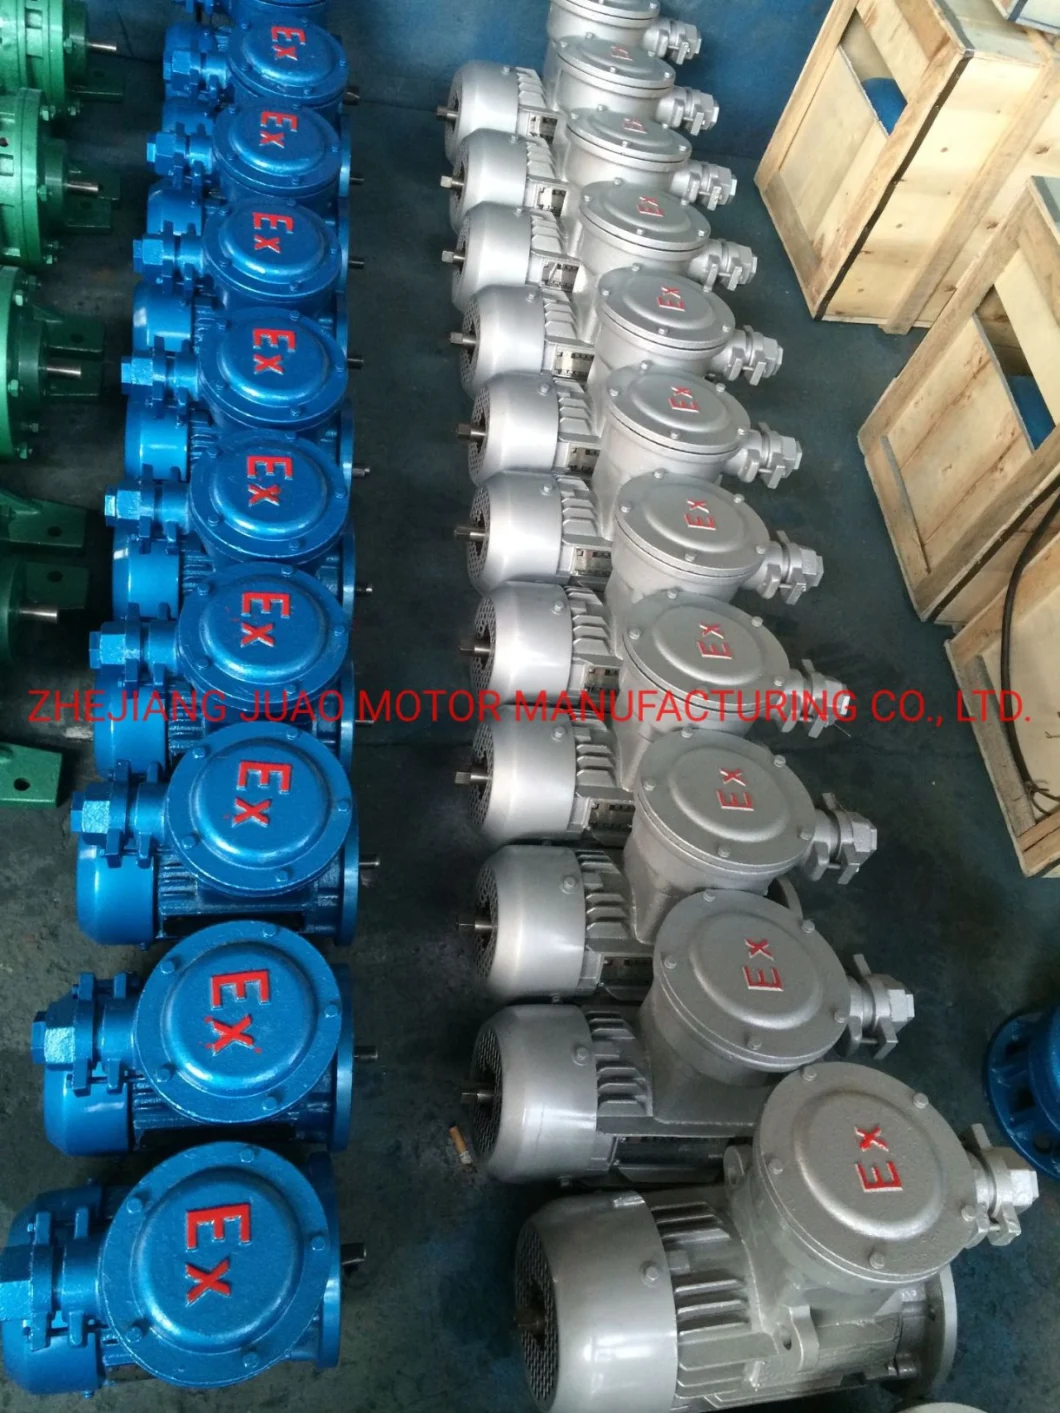 Ybx3 132s-6 3kw Explosion Proof Electrical Motor